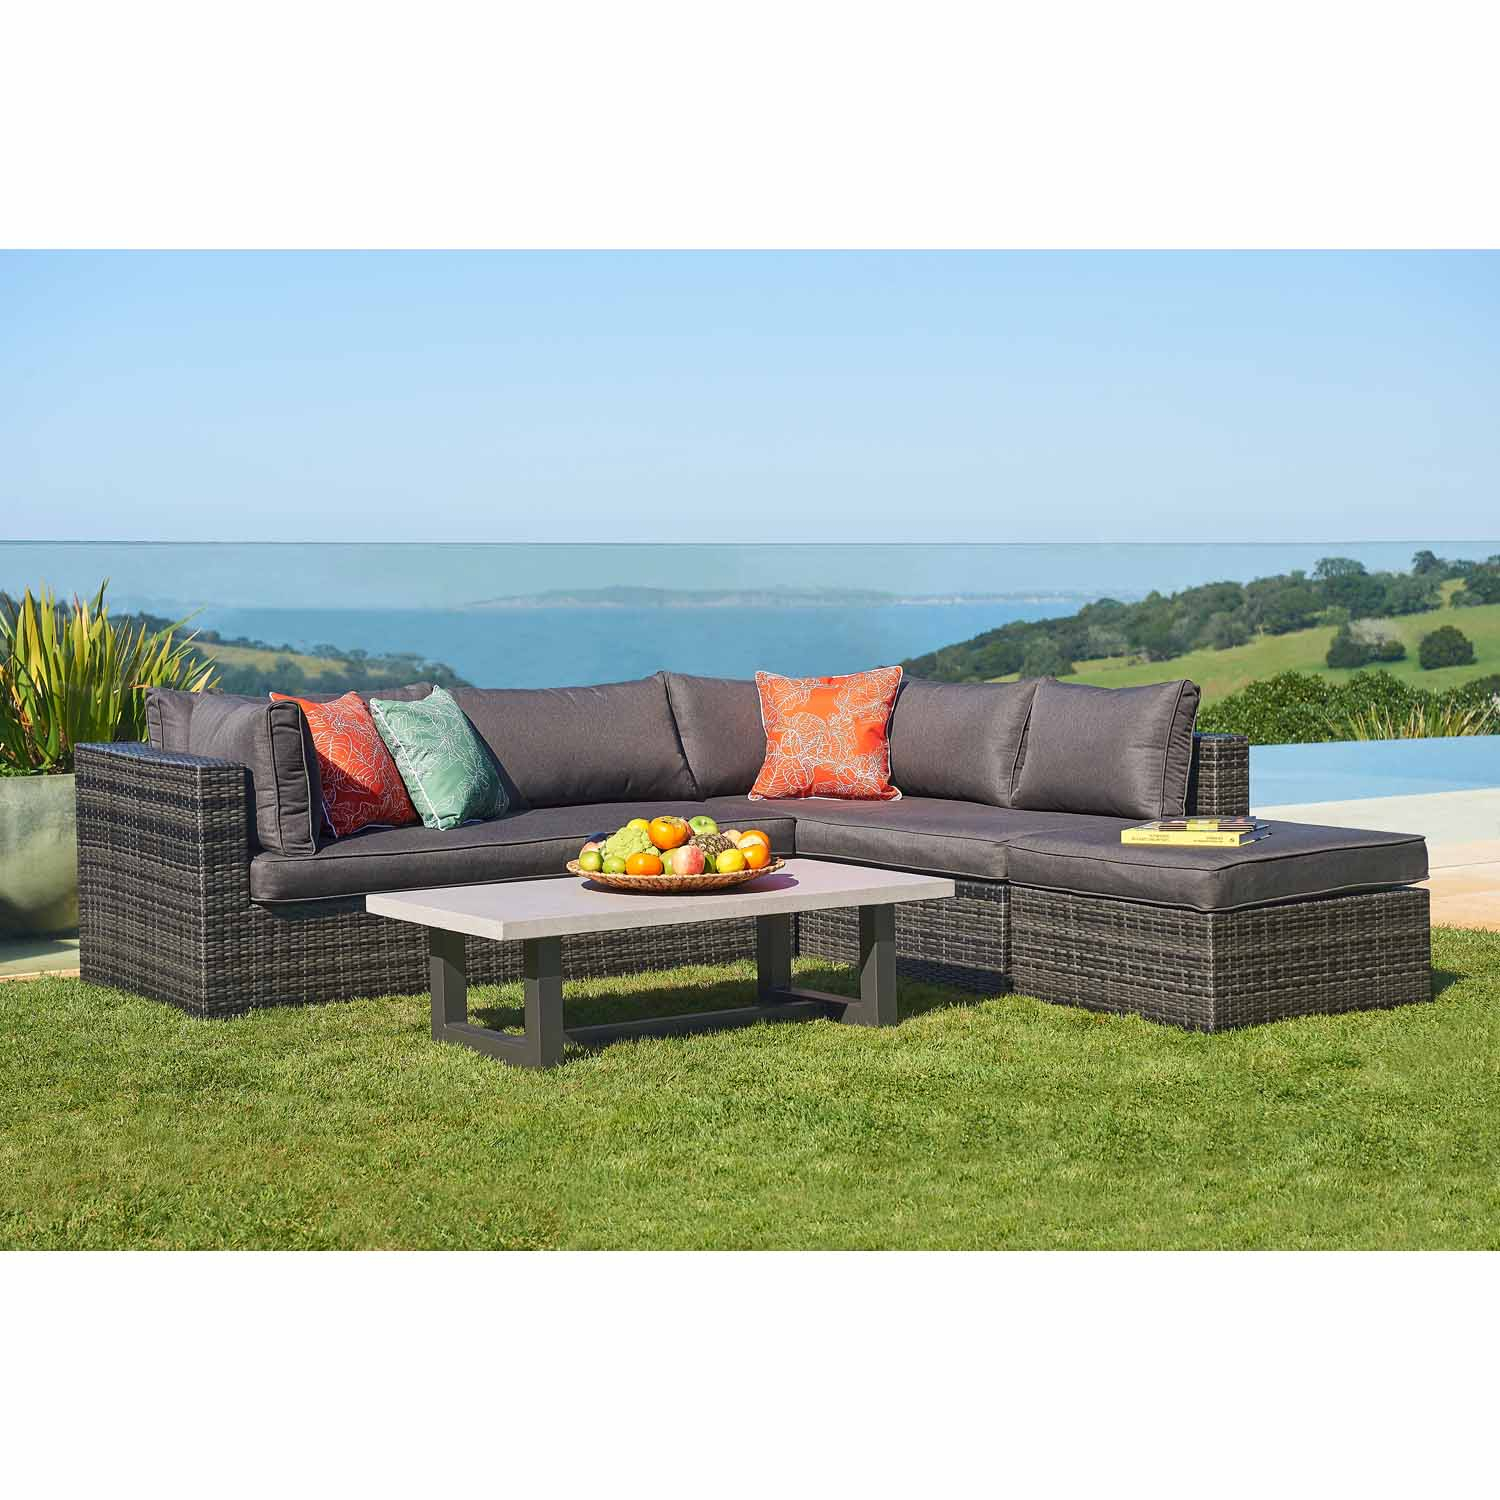 Contempo Outdoor Corner Lounge Setting 4 Piece pertaining to dimensions 1500 X 1500